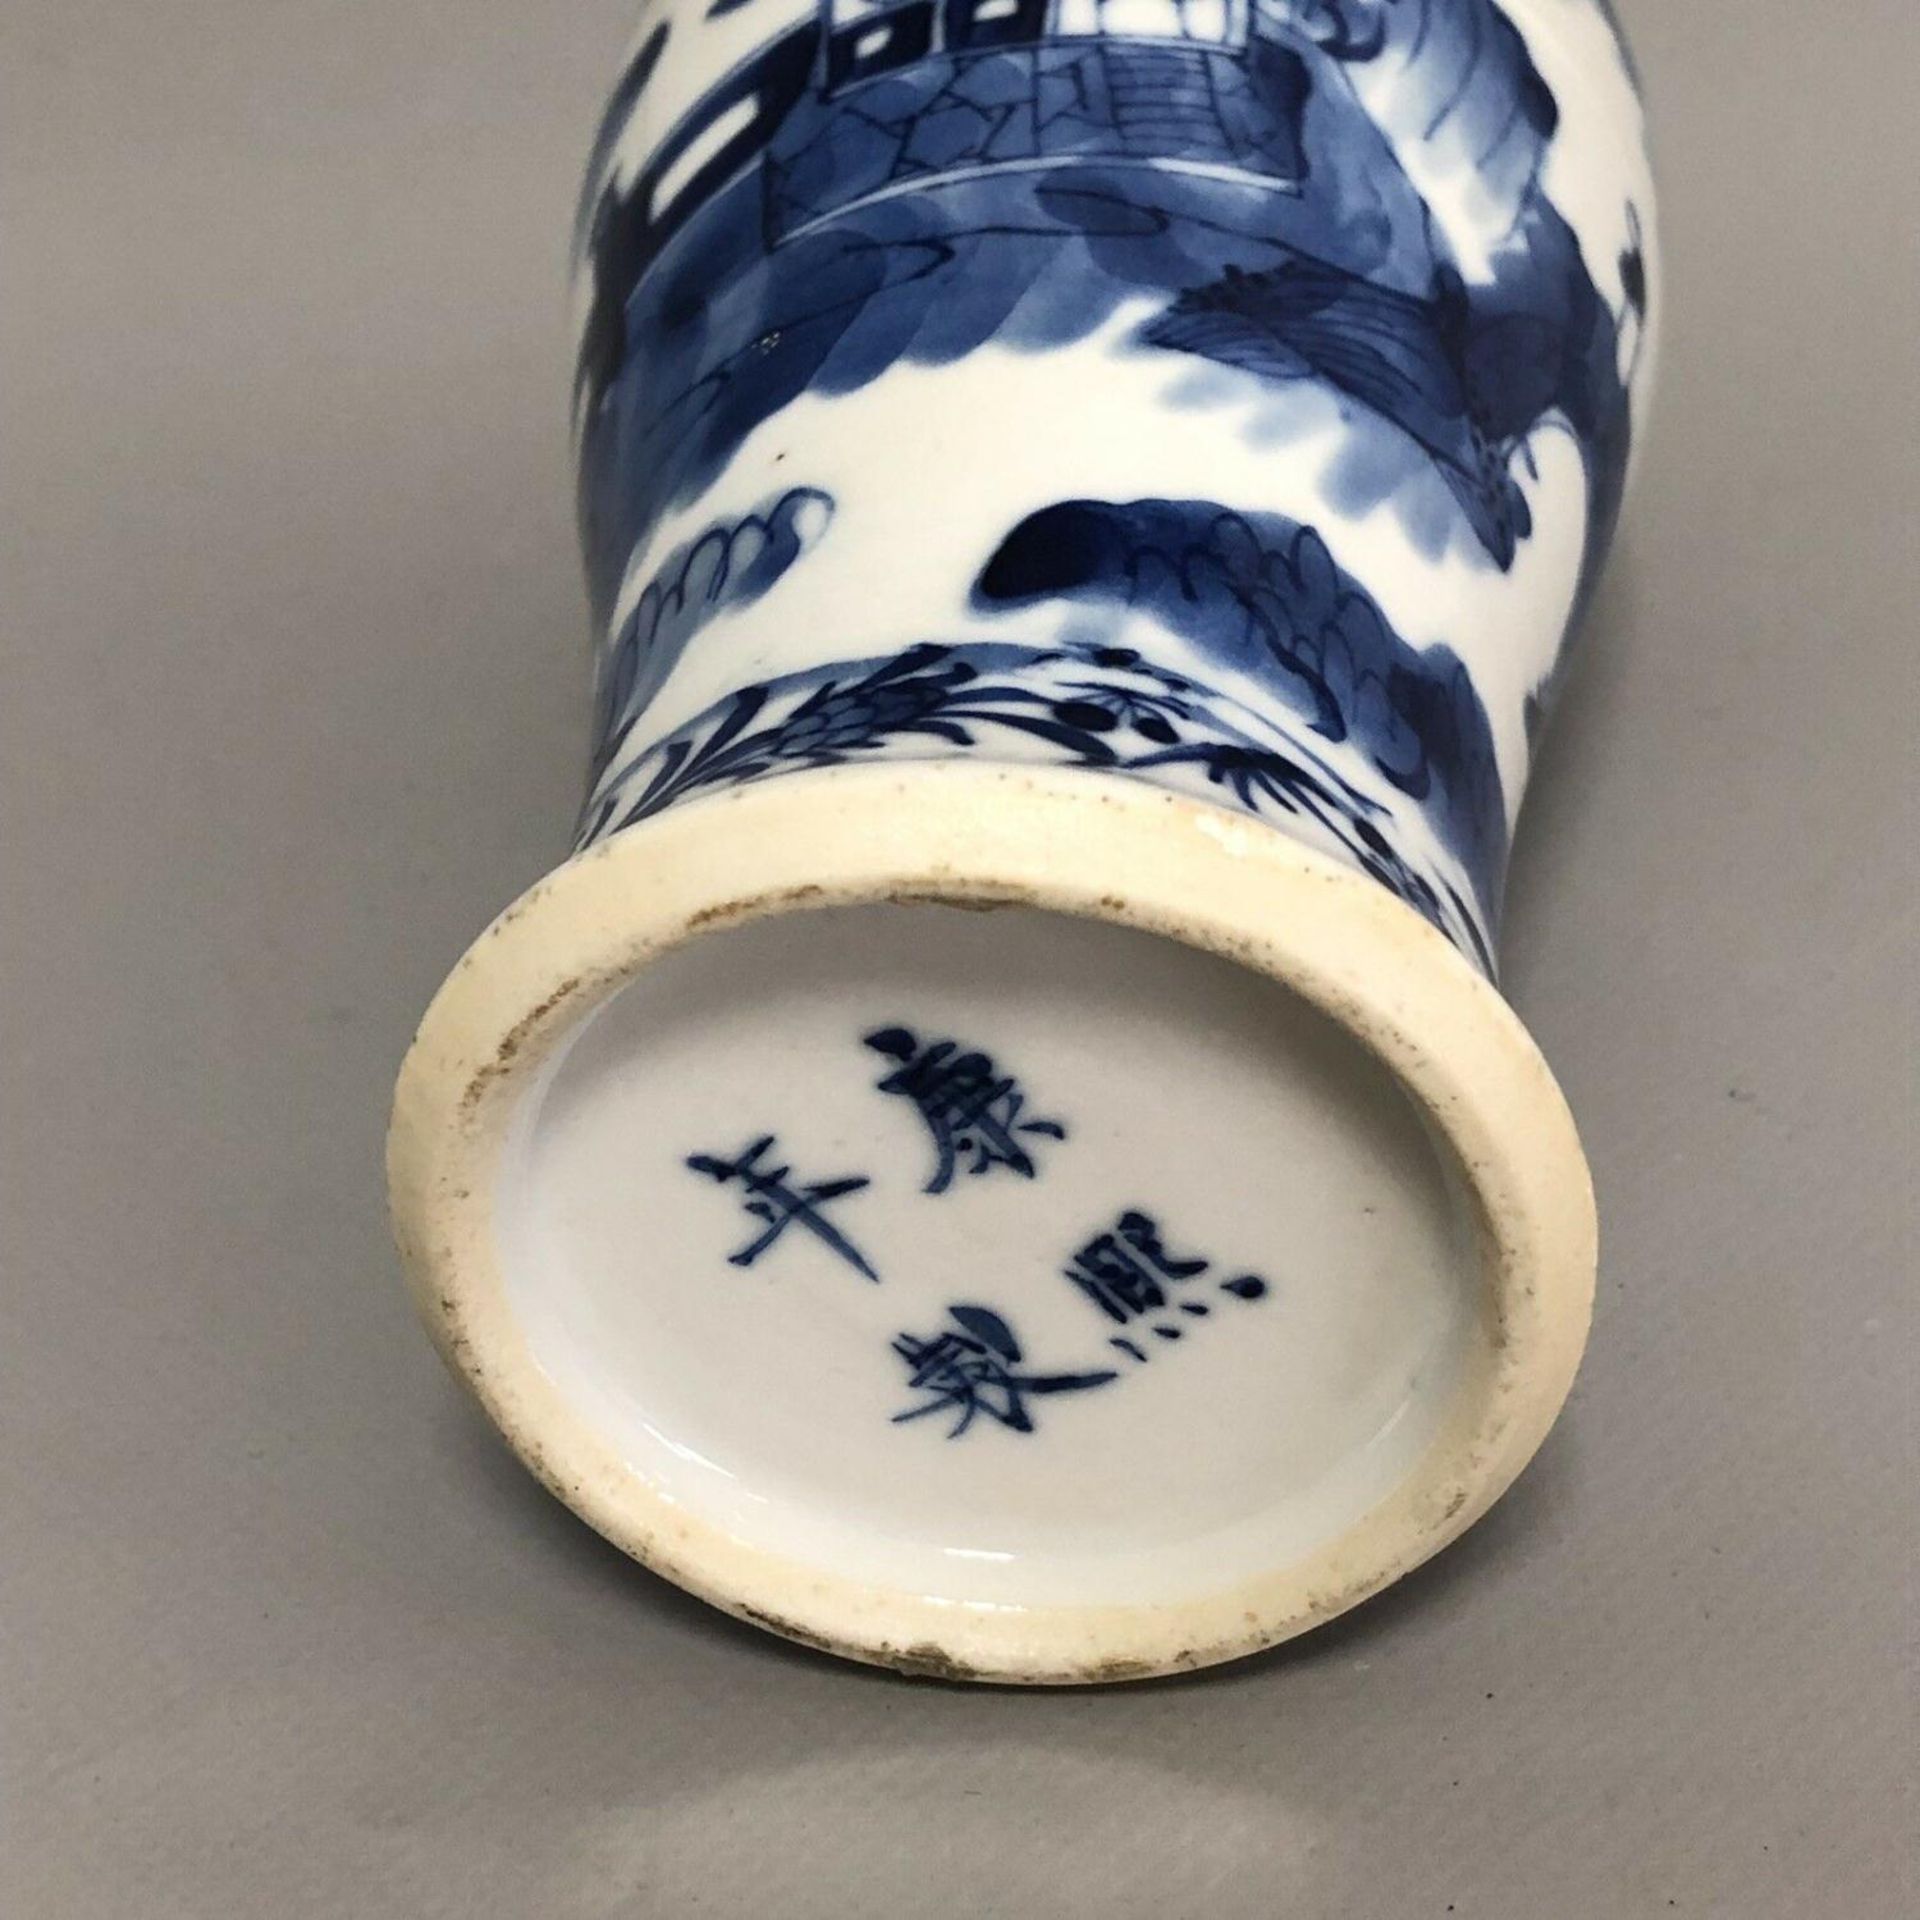 Chinese blue and white porcelain vase - Kangxi four character hand painted mark - Image 4 of 7